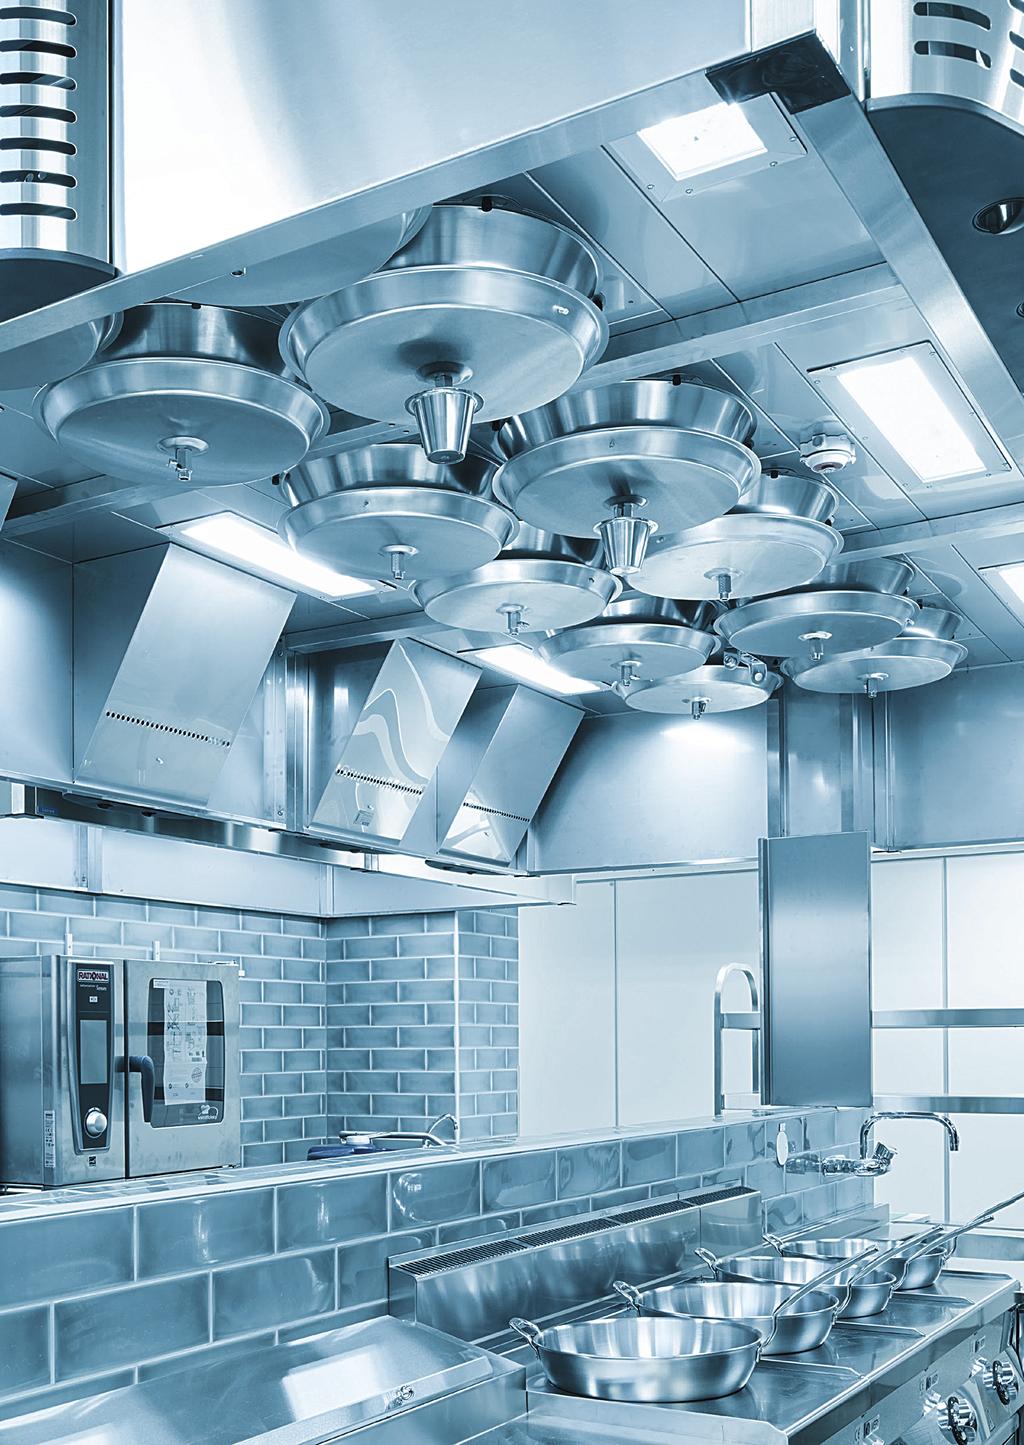 UV-TURBO HOODS helping professionals to enjoy their work and give their best.